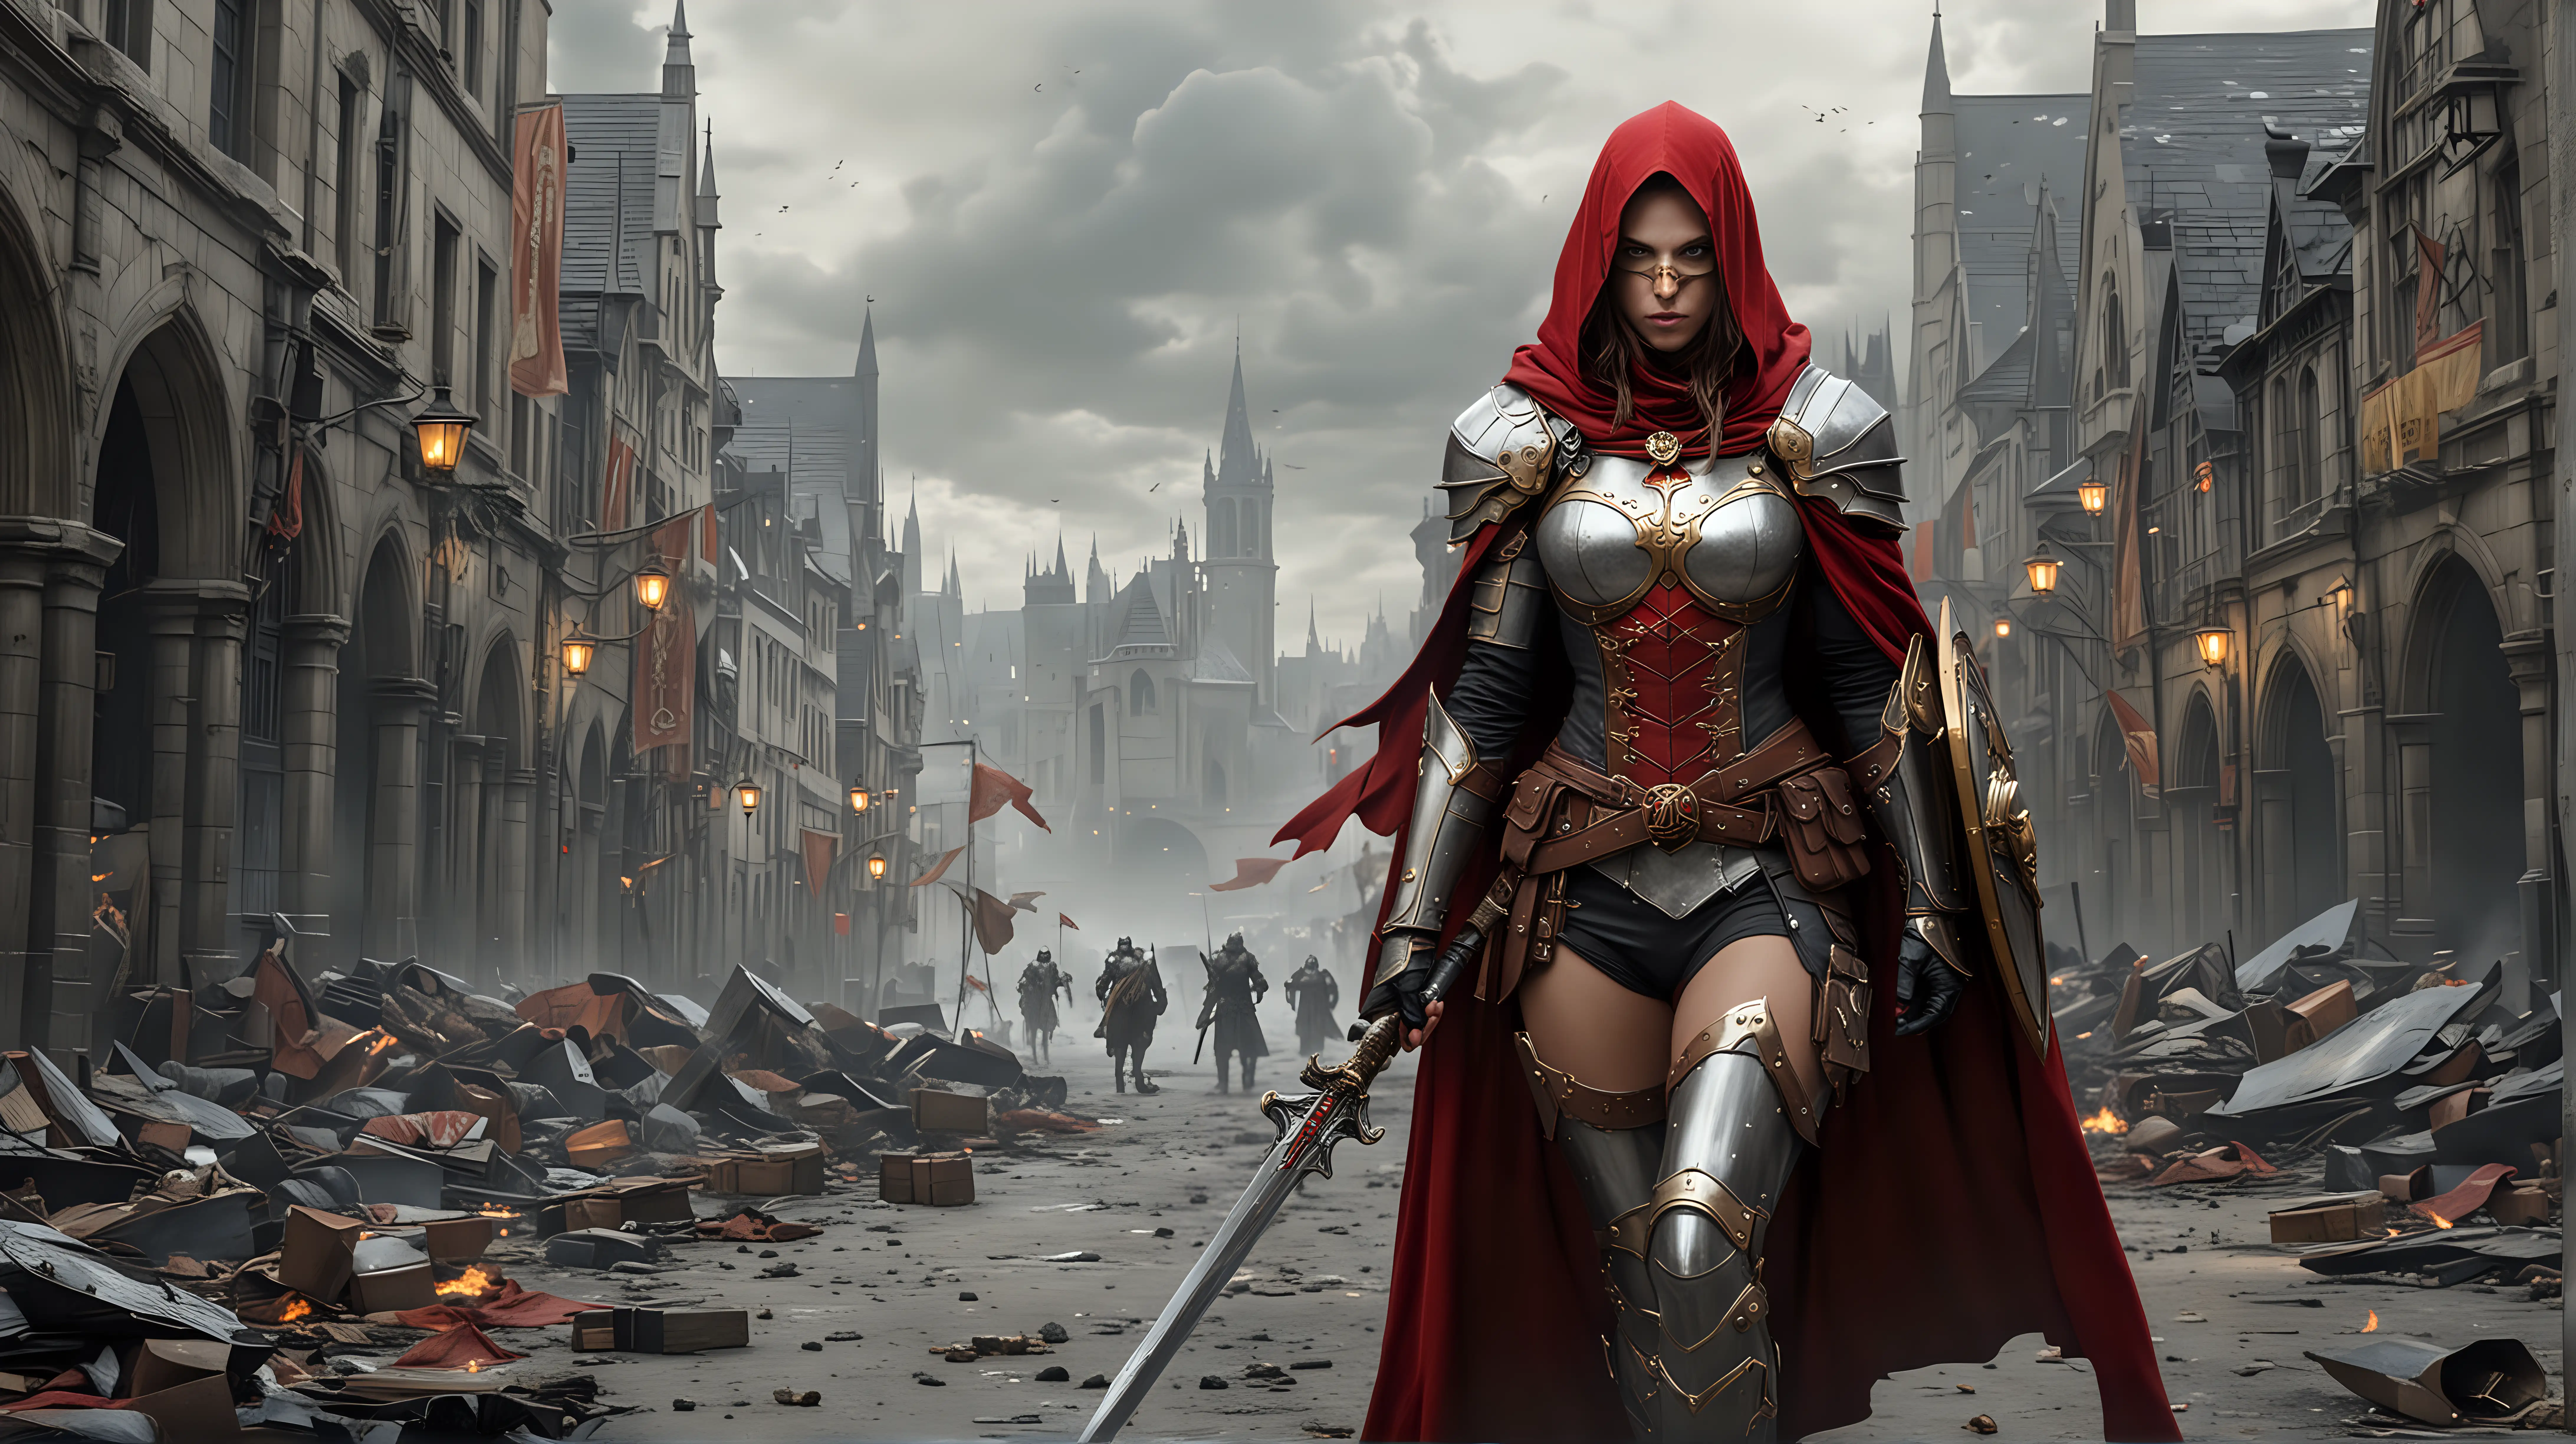 Epic Fantasy Inquisitor Knight Faces Off Against a Woman in Red Hood with Drawn Weapons